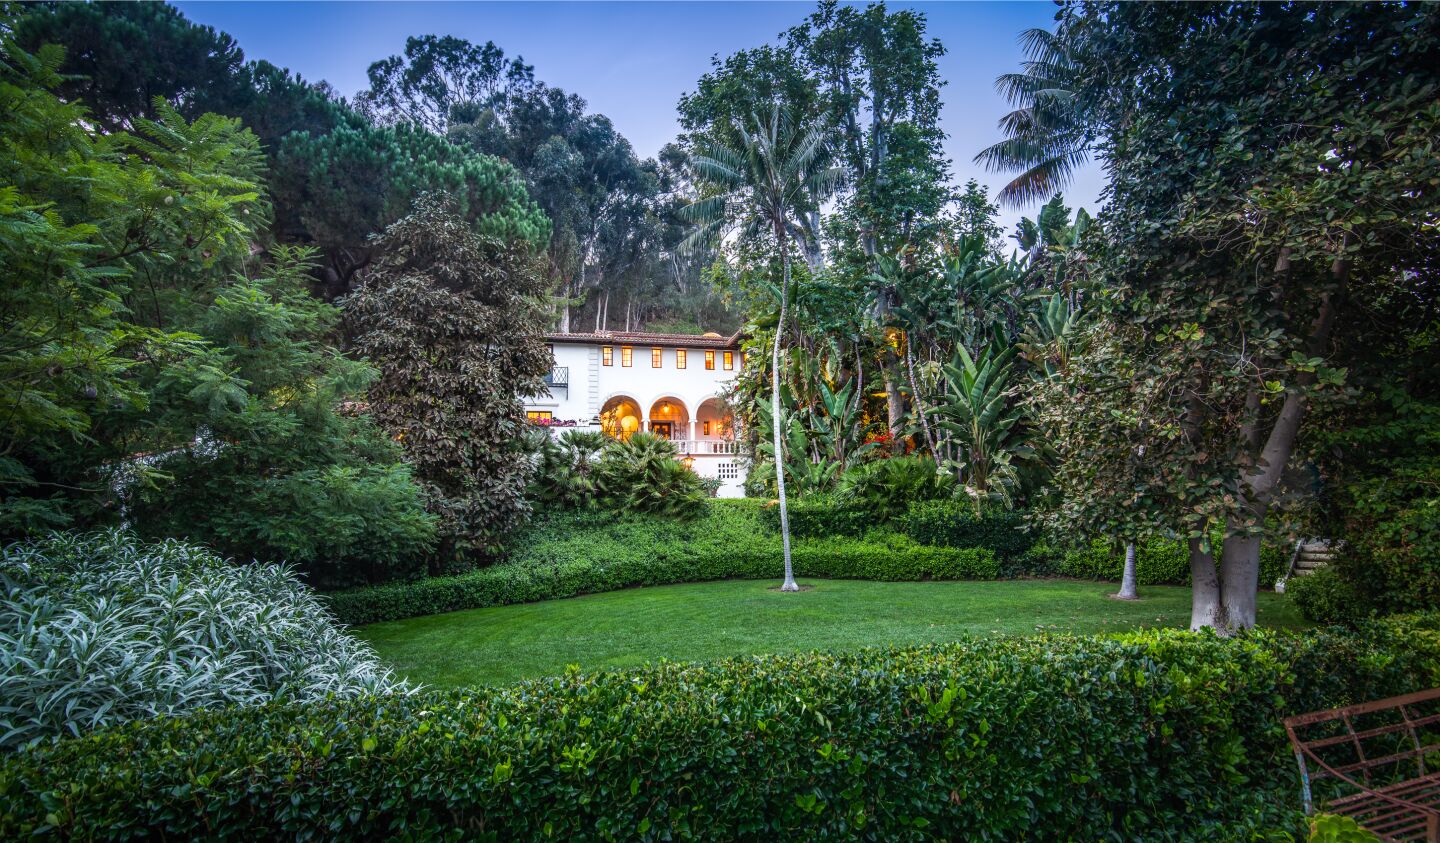 The leafy spread includes a 1930s mansion, guesthouse, gatehouse and 74-foot swimming pool surrounded by lawns, gardens and citrus groves.